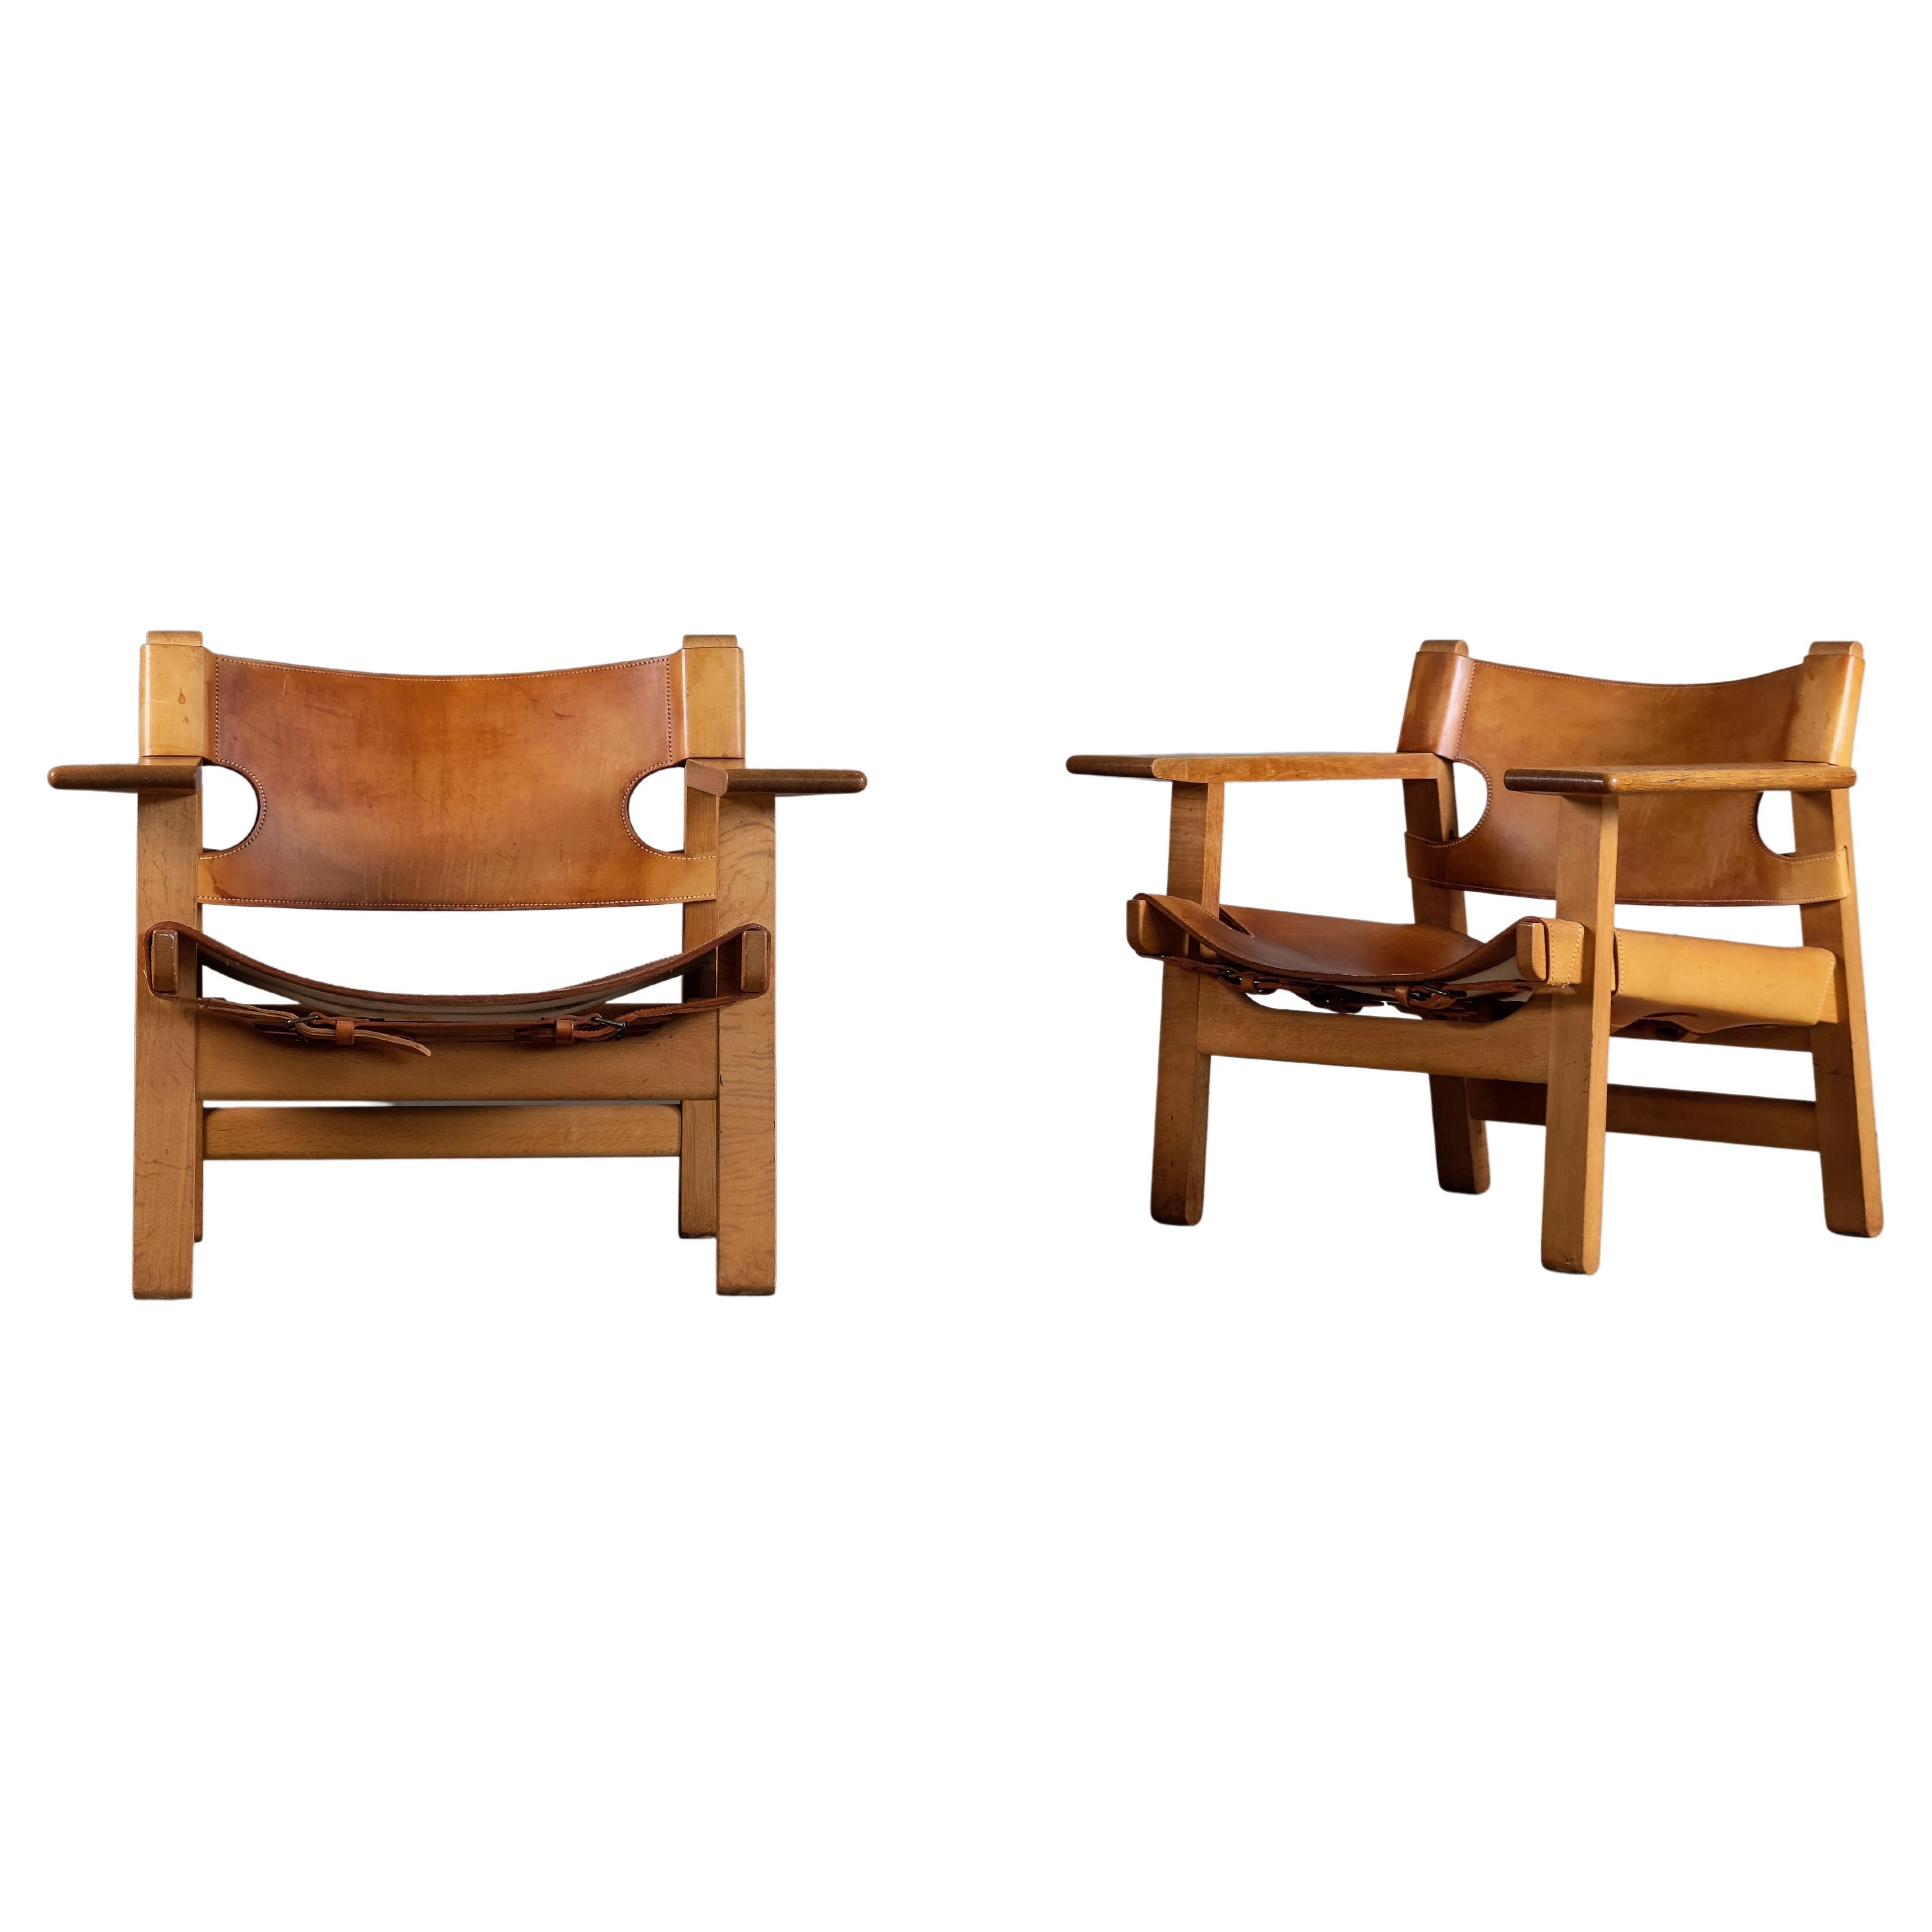 Pair of Spanish Chairs by Børge Mogensen, 1960s